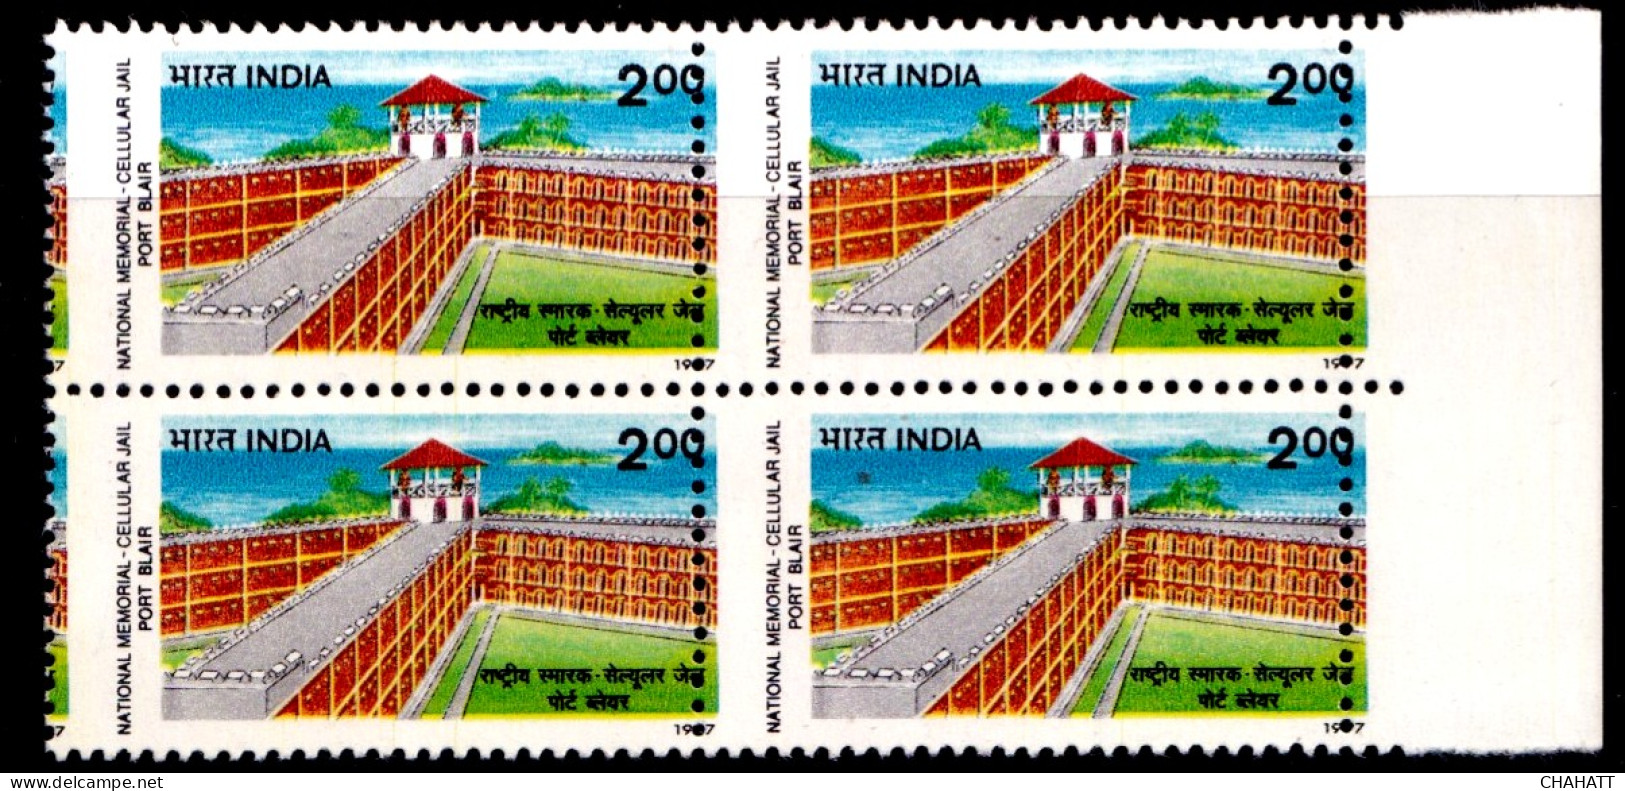 CELLULAR JAIL- PORT BLAIR- NATIONAL MEMORIAL- ERROR-DRAMATIC PERFORATION AND YELLOW SHIFT-BLKINDIA-1997- MNH-IE-92 - Errors, Freaks & Oddities (EFO)